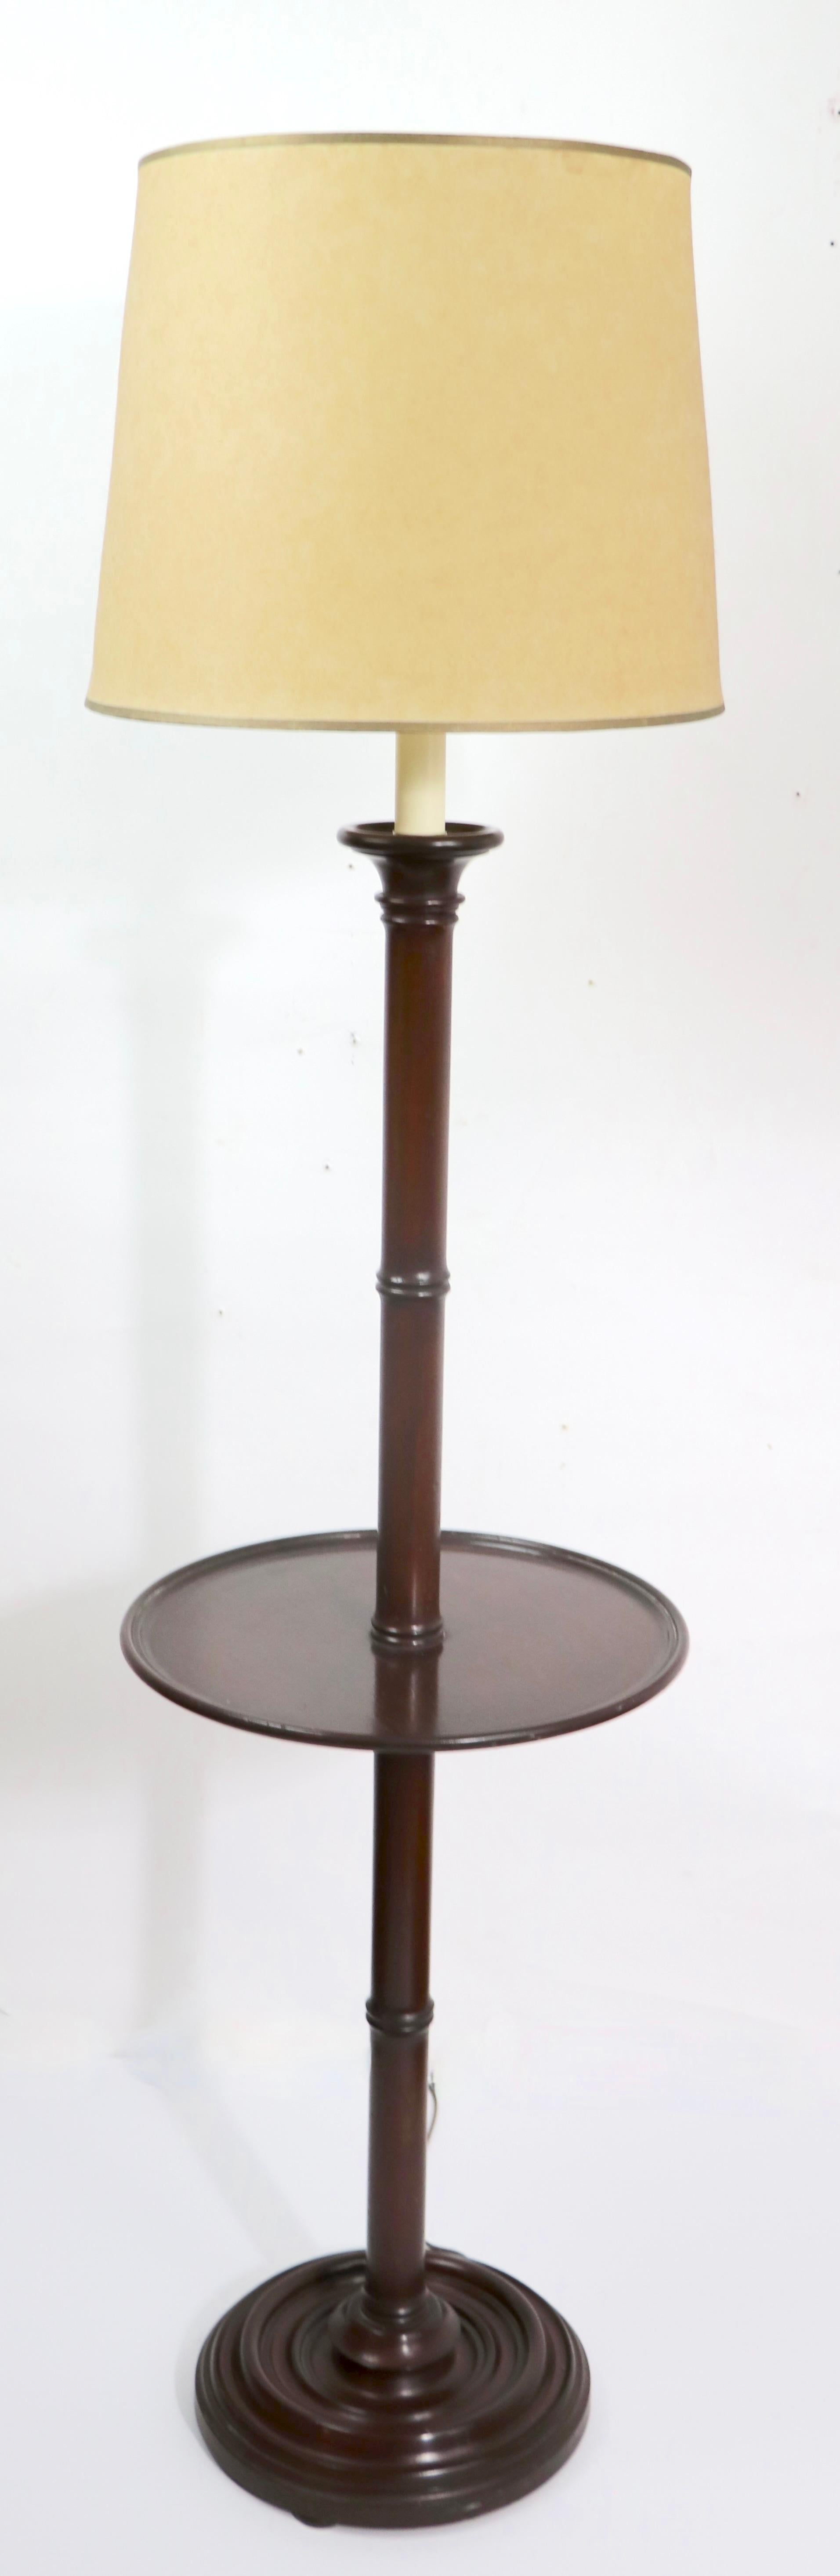 Stylish pair of floor lamp/ tables having a turned wood center pole with circular table surface incorporated in the middle of the lamp. Table surface 15 inch Dia. Total H 61 x H to top of wood 52 inch - Constructed of solid mahogany.
 Clean,